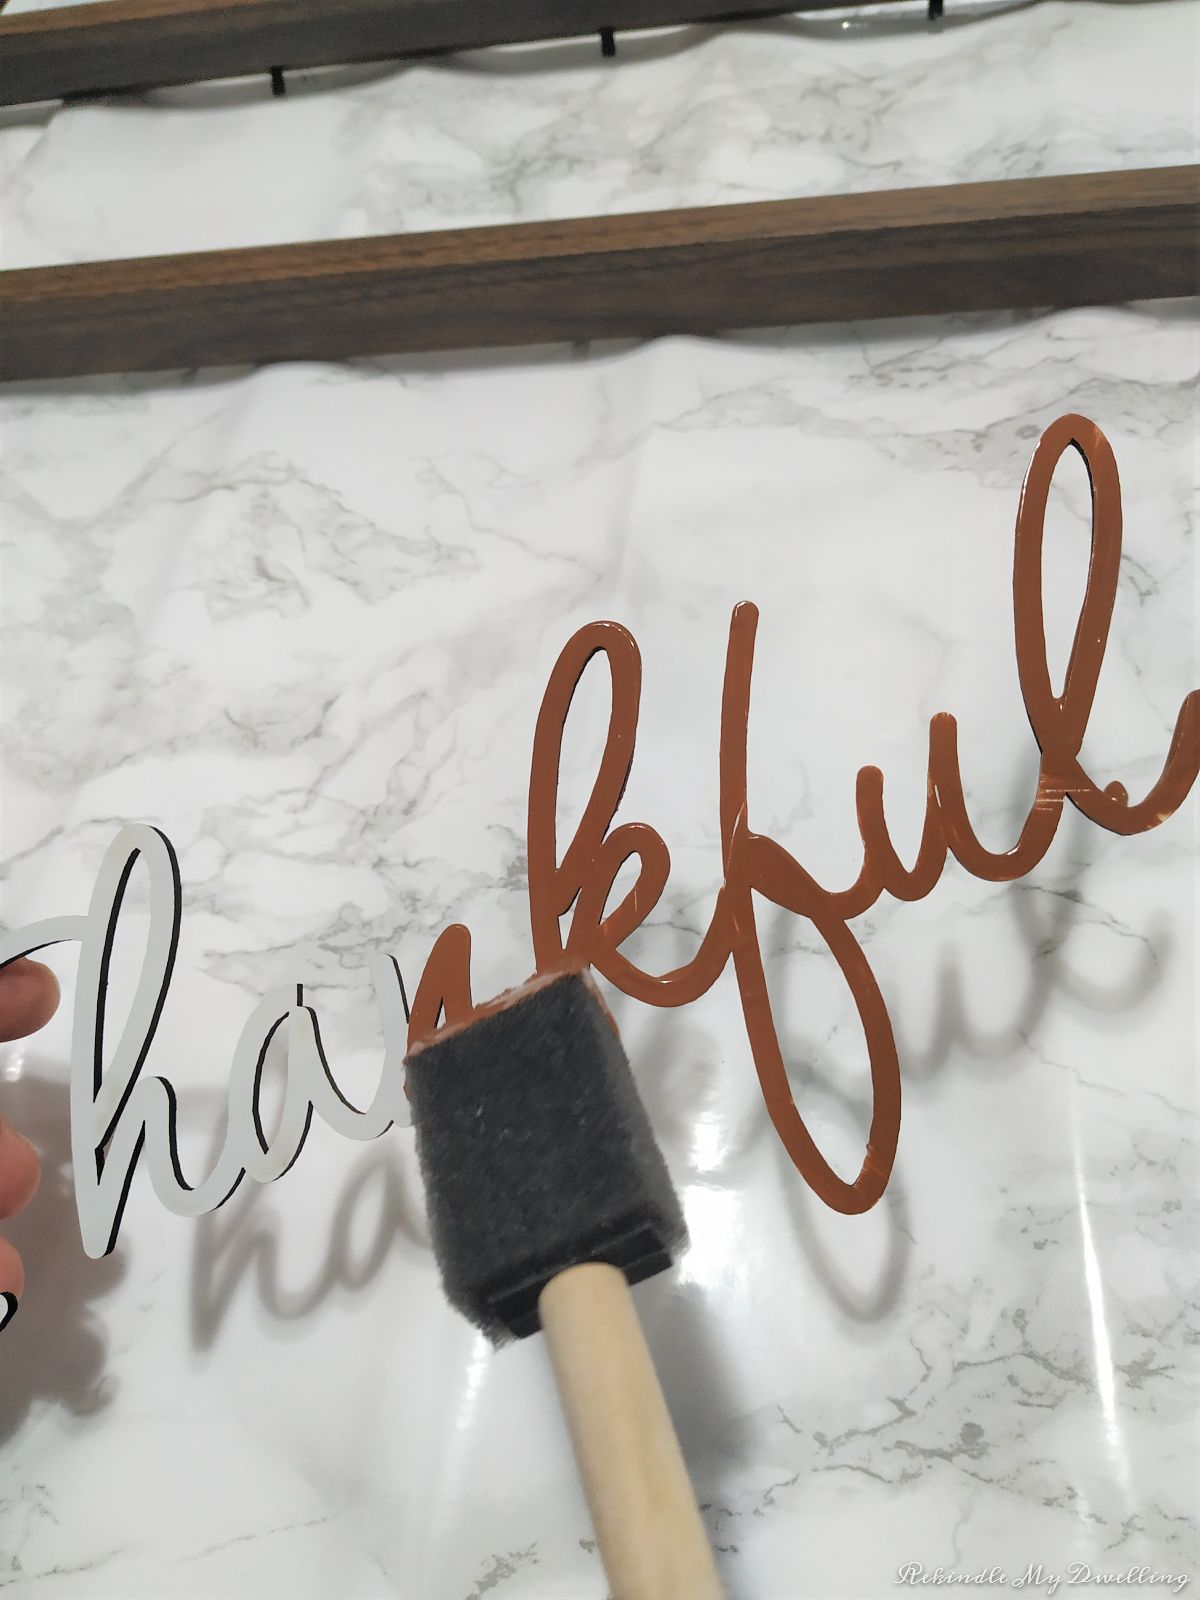 Painting the thankful lettering brown.